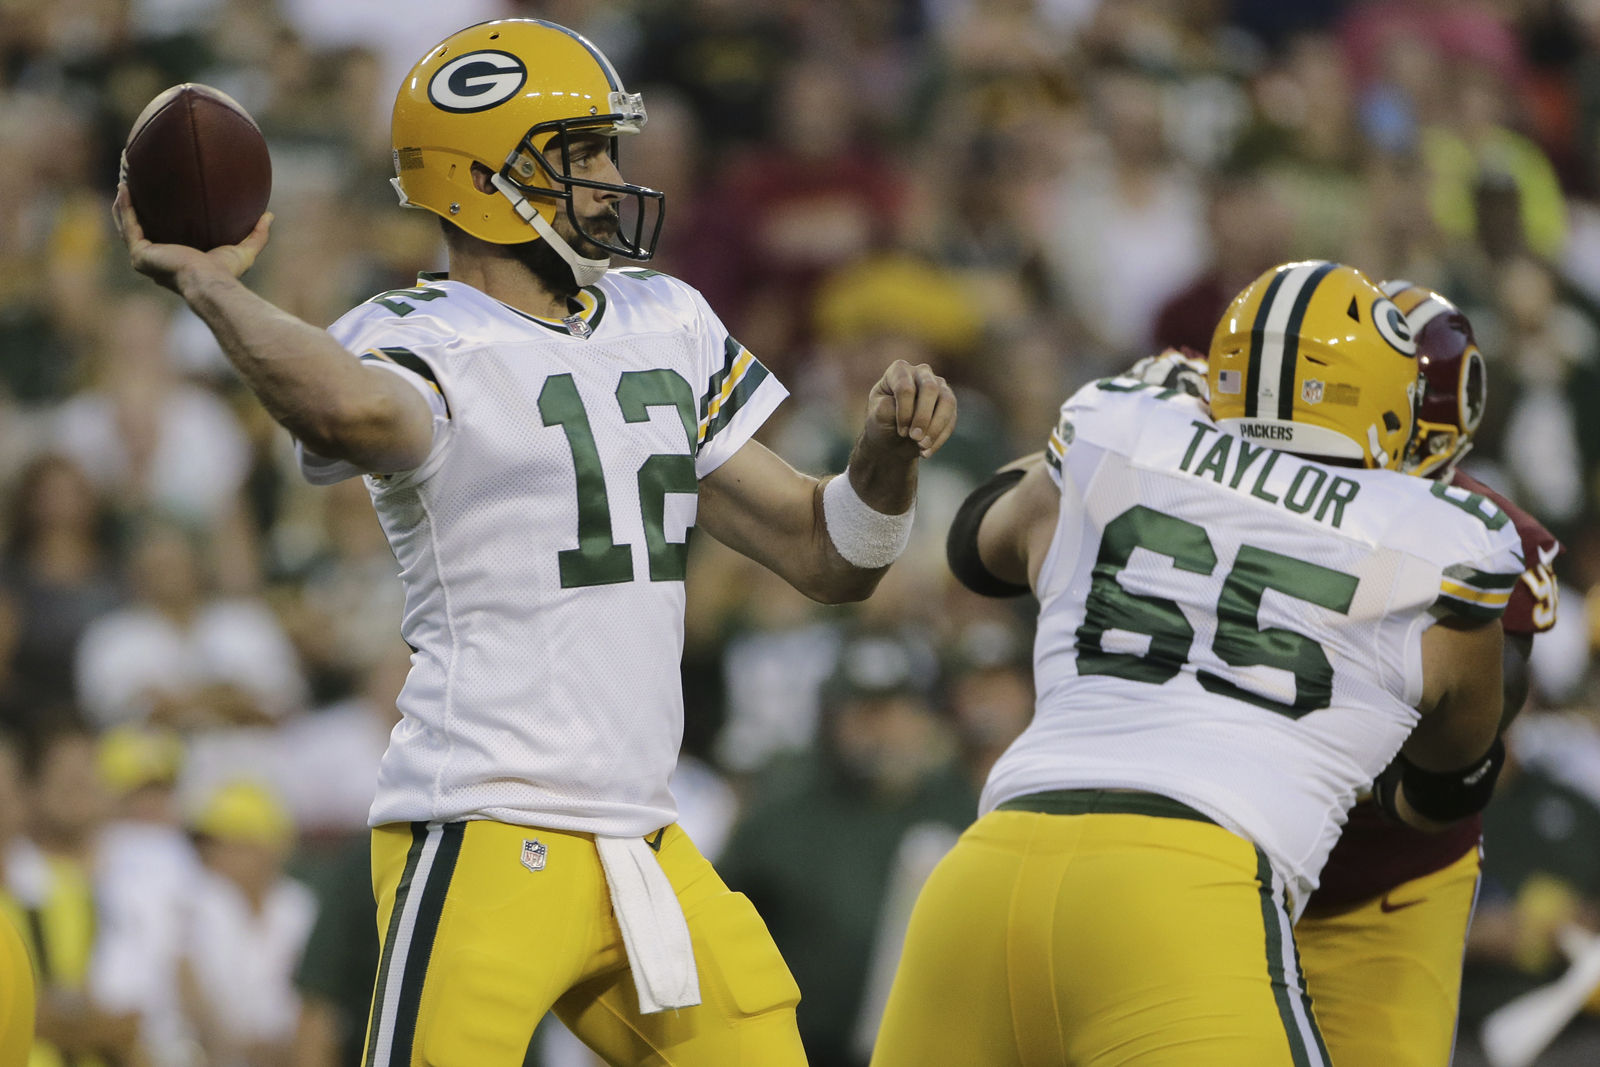 Green Bay Packers quarterback Aaron Rodgers (12) passes the ball during the first half of an NFL preseason football game against the Washington Redskins in Landover, Md., Saturday, Aug. 19, 2017. (AP Photo/Mark Tenally)